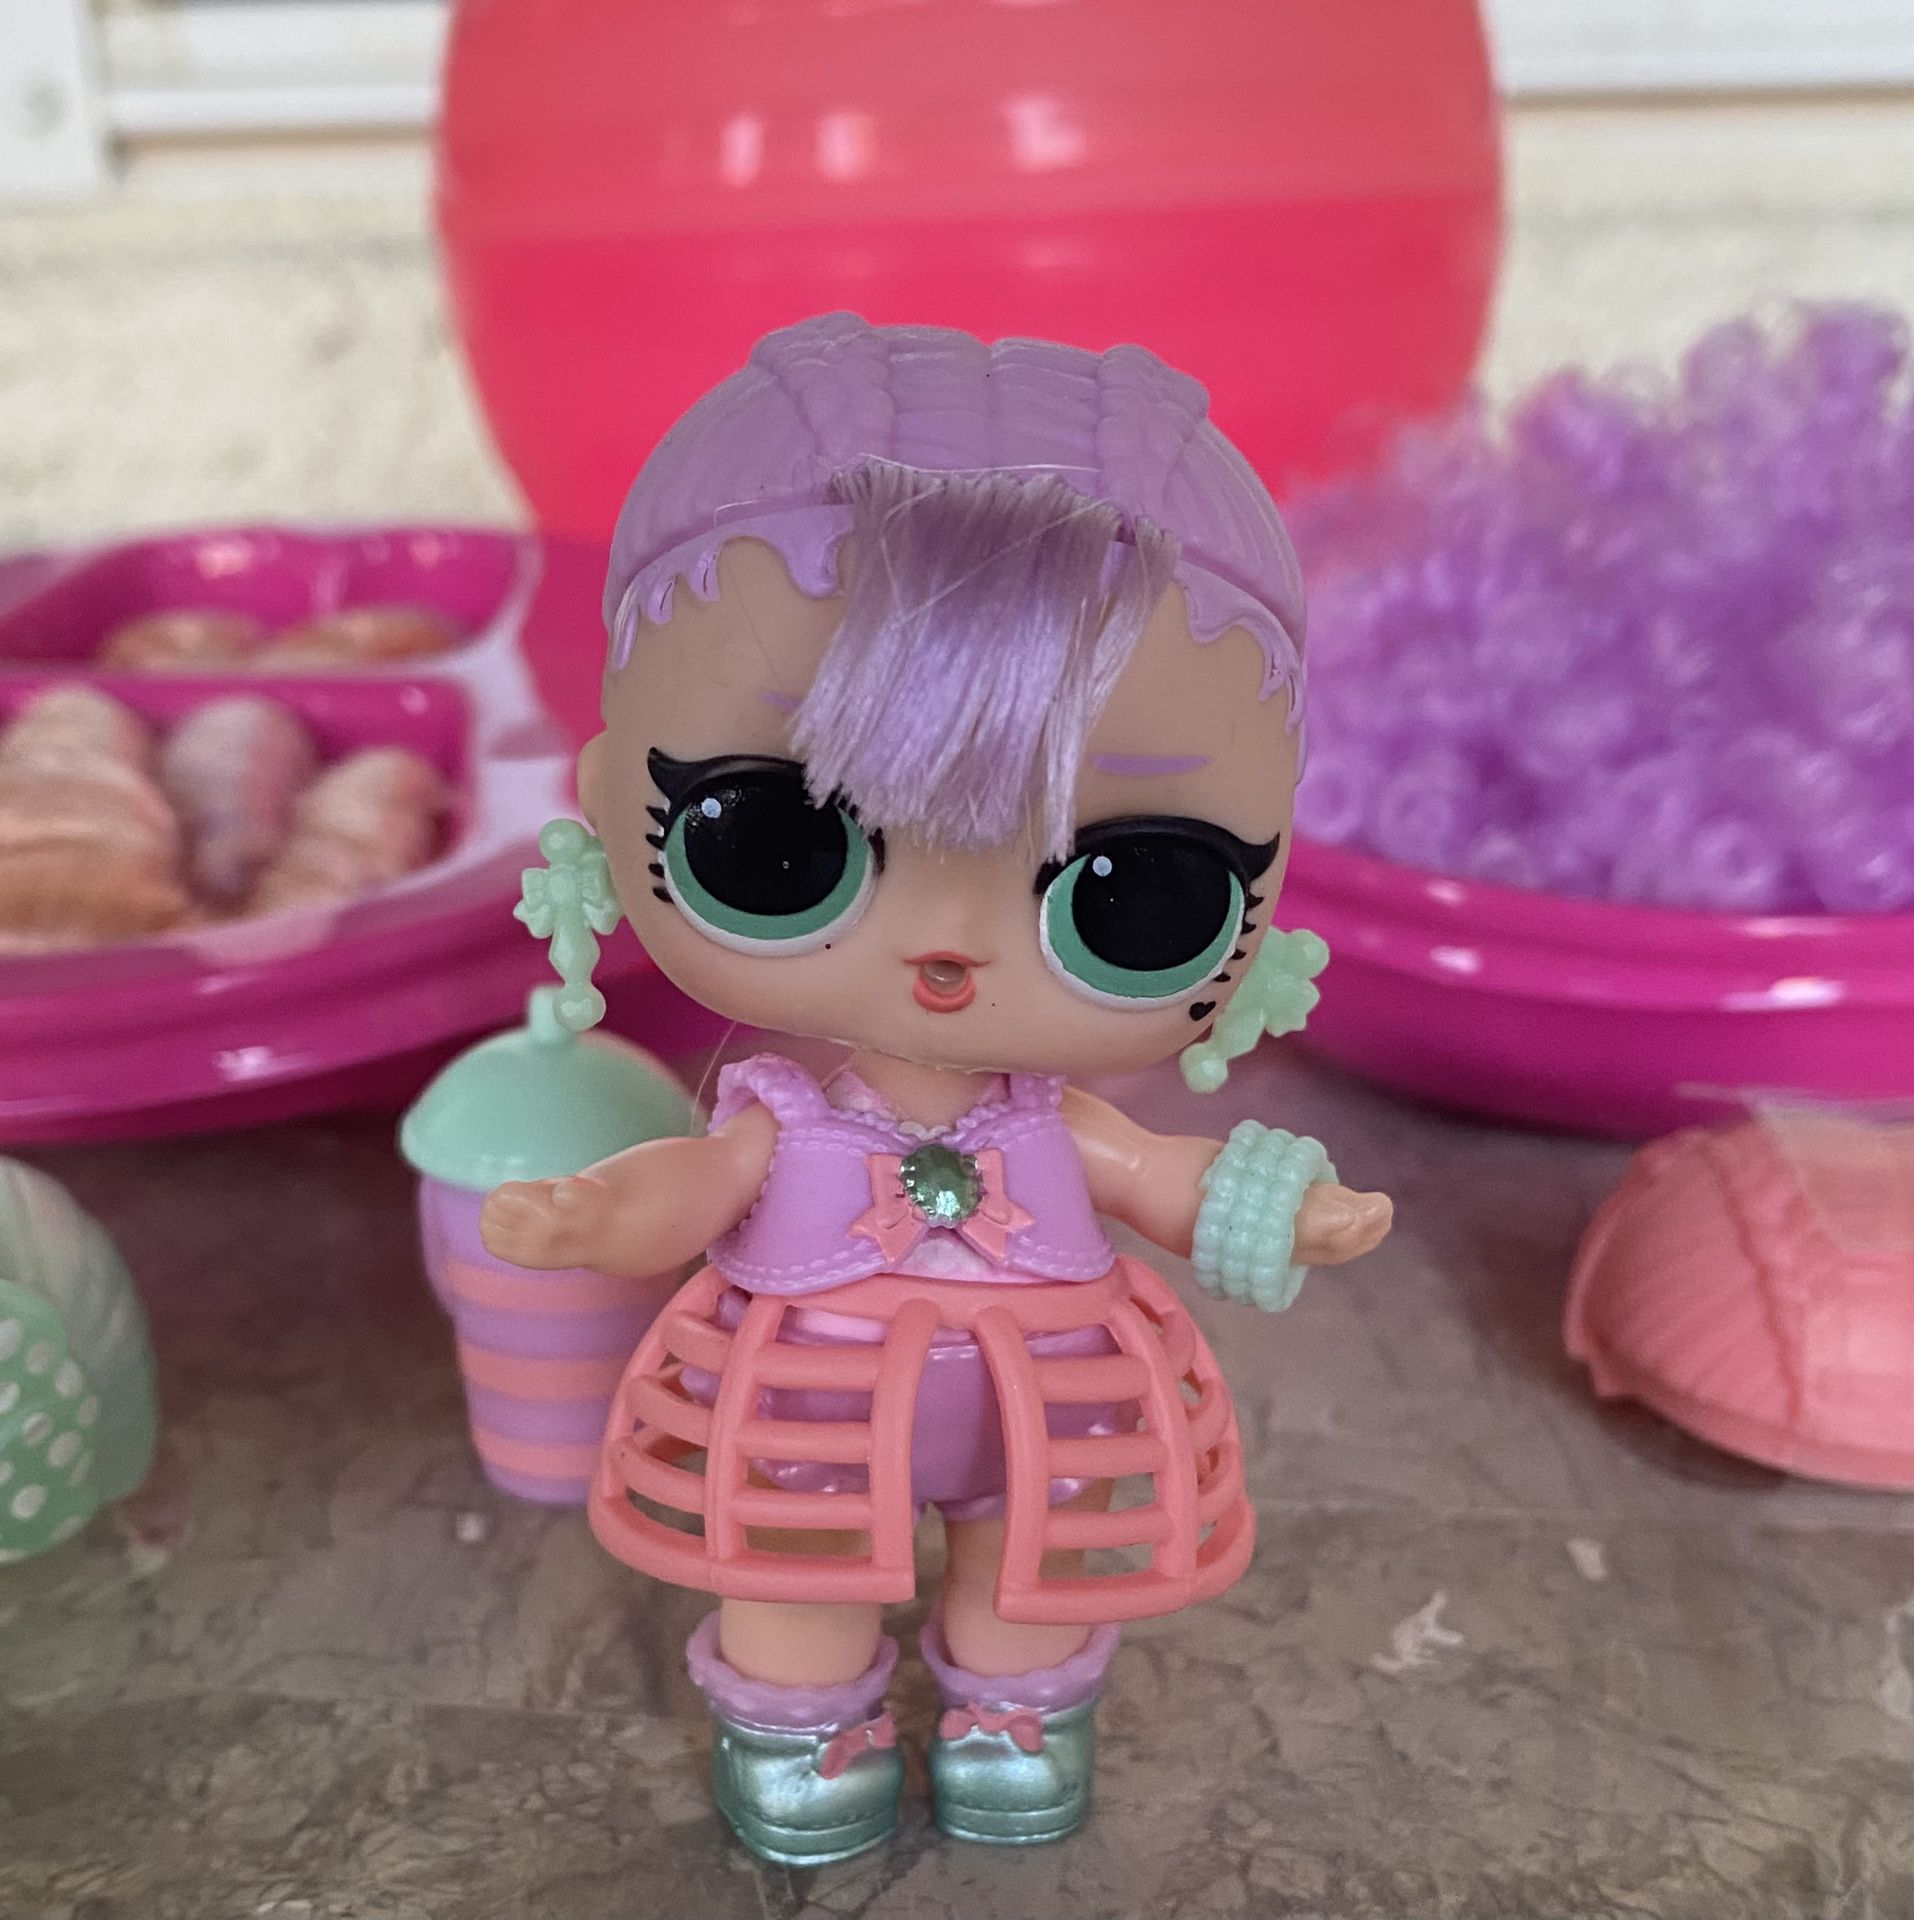 L.O.L Surprise Hairvibes Doll